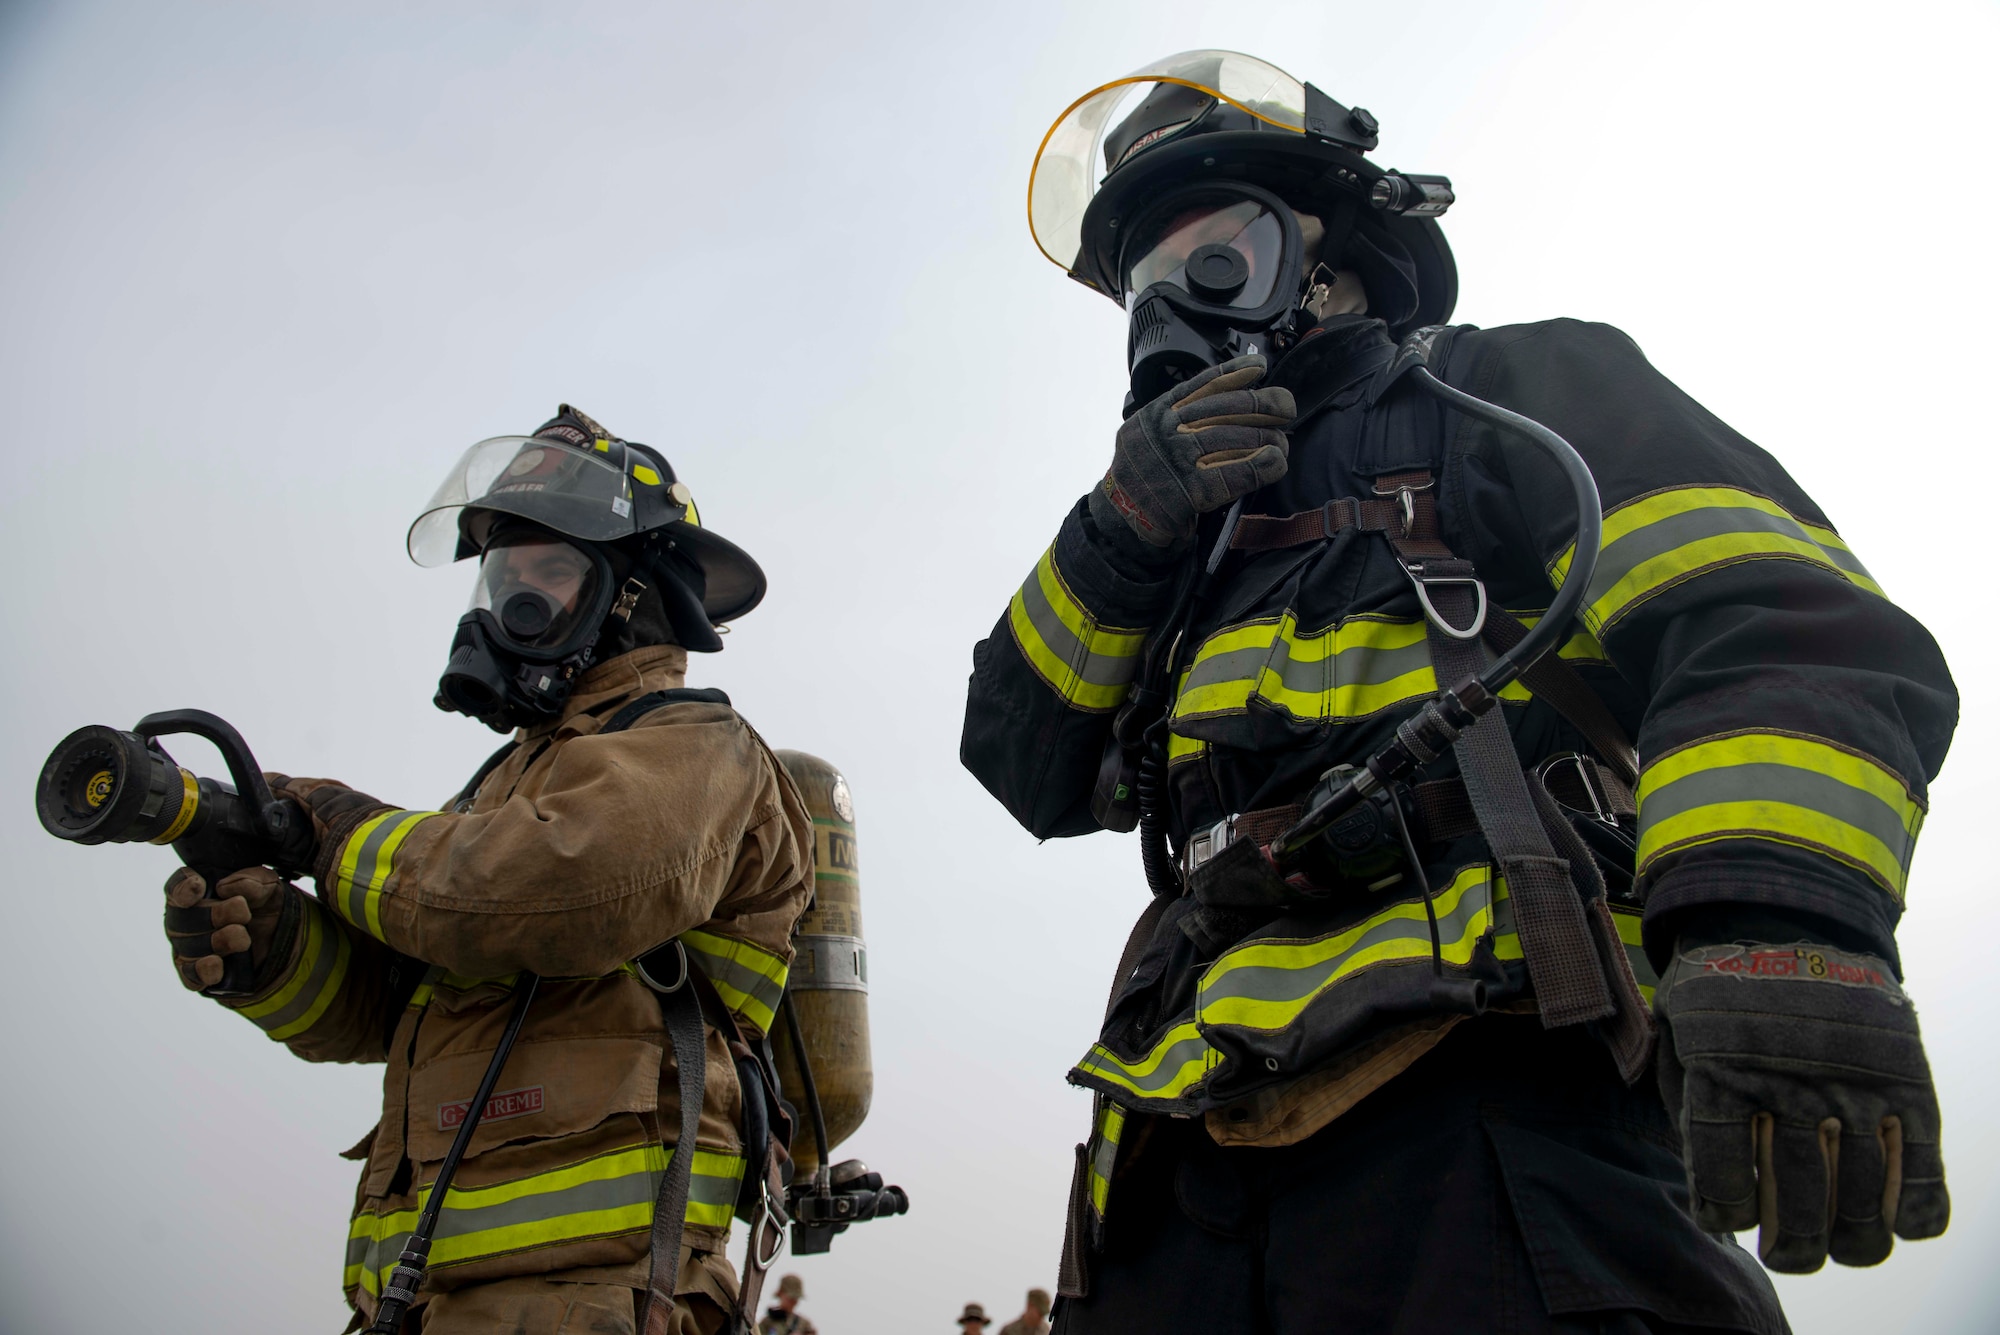 Firefighters from the 386th Expeditionary Civil Engineer Squadron simulate decontamination measures during a training exercise at Ali Al Salem Air Base, Kuwait, May 5, 2020. The exercise was designed to enhance interoperability between multiple first responder teams with the goal of responding, identifying and controlling potential real-world scenarios. (U.S. Air Force photo by Senior Airman JaNae Capuno)